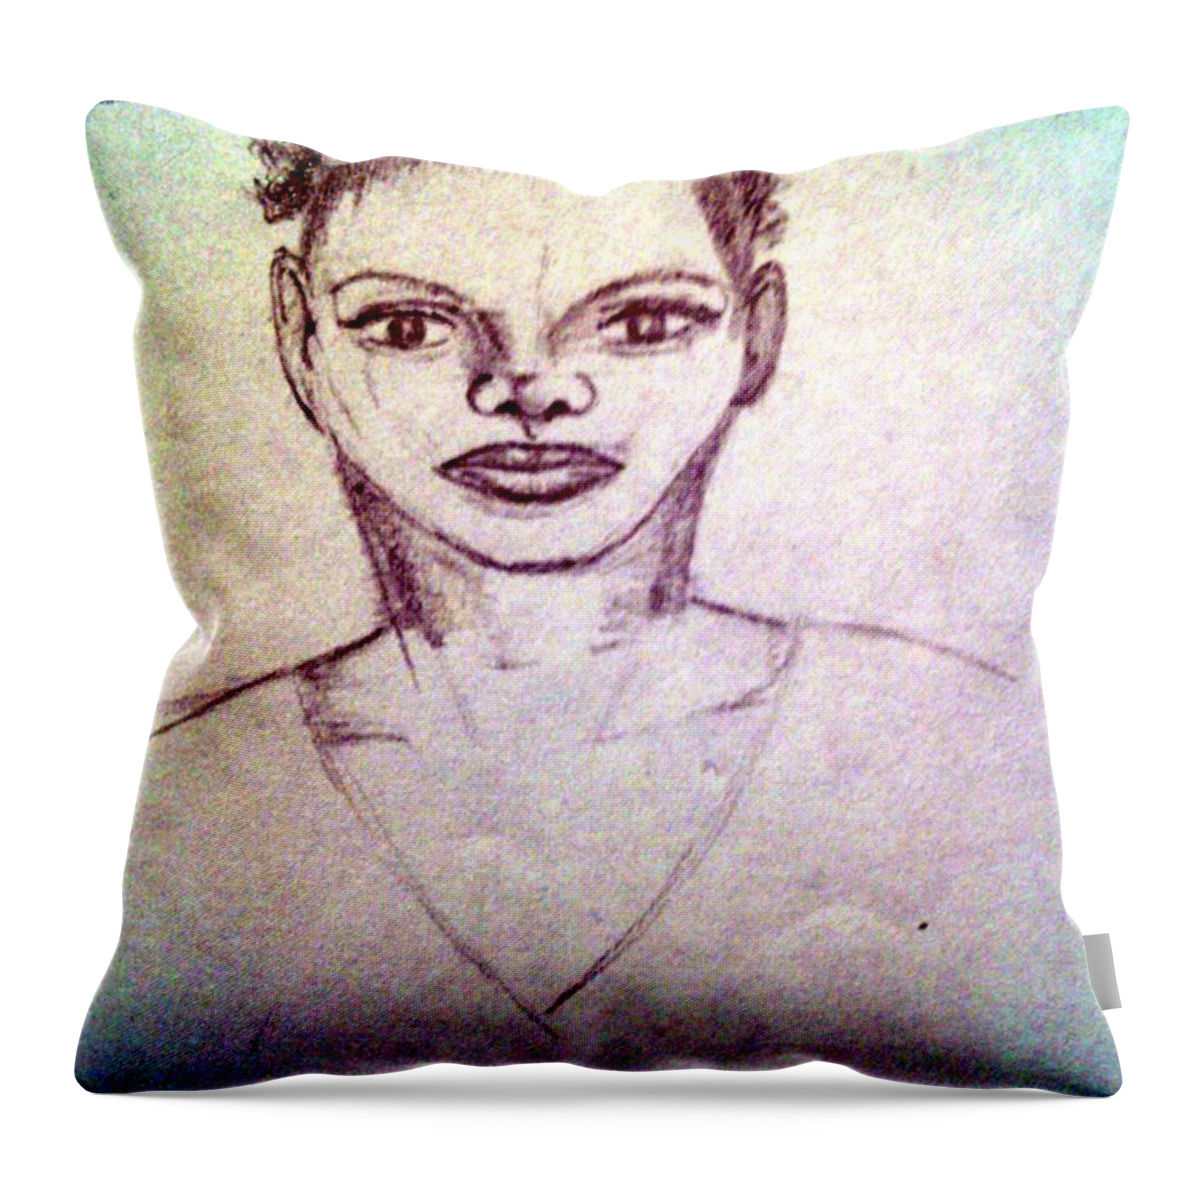 Black Art Throw Pillow featuring the drawing Untitled Black Woman by Cn